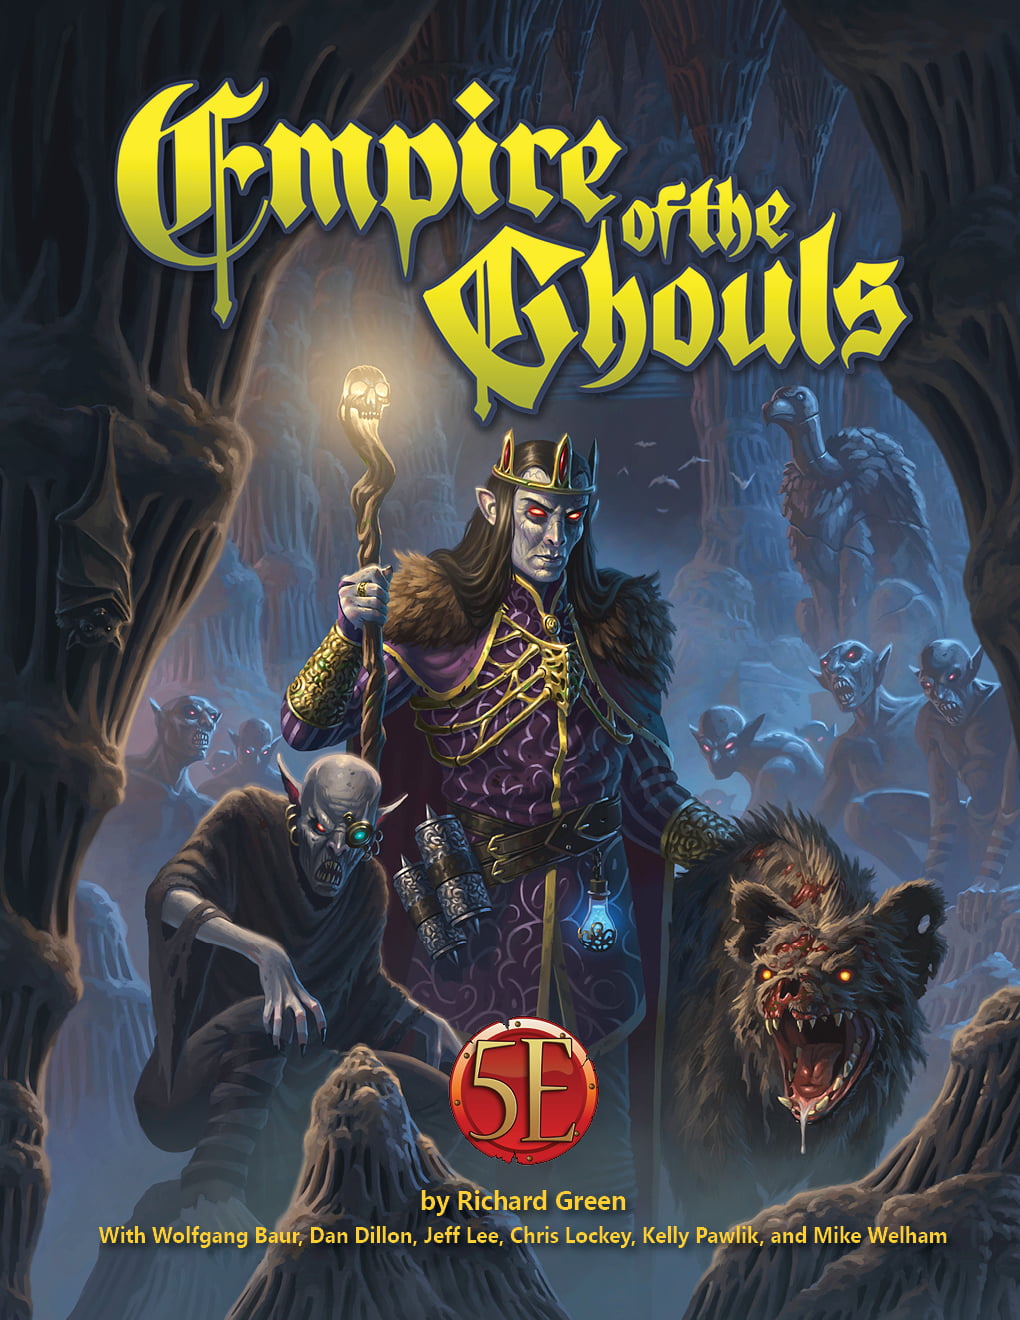 Campaign Against the Undead Empire of Ghouls – Nerdarchy